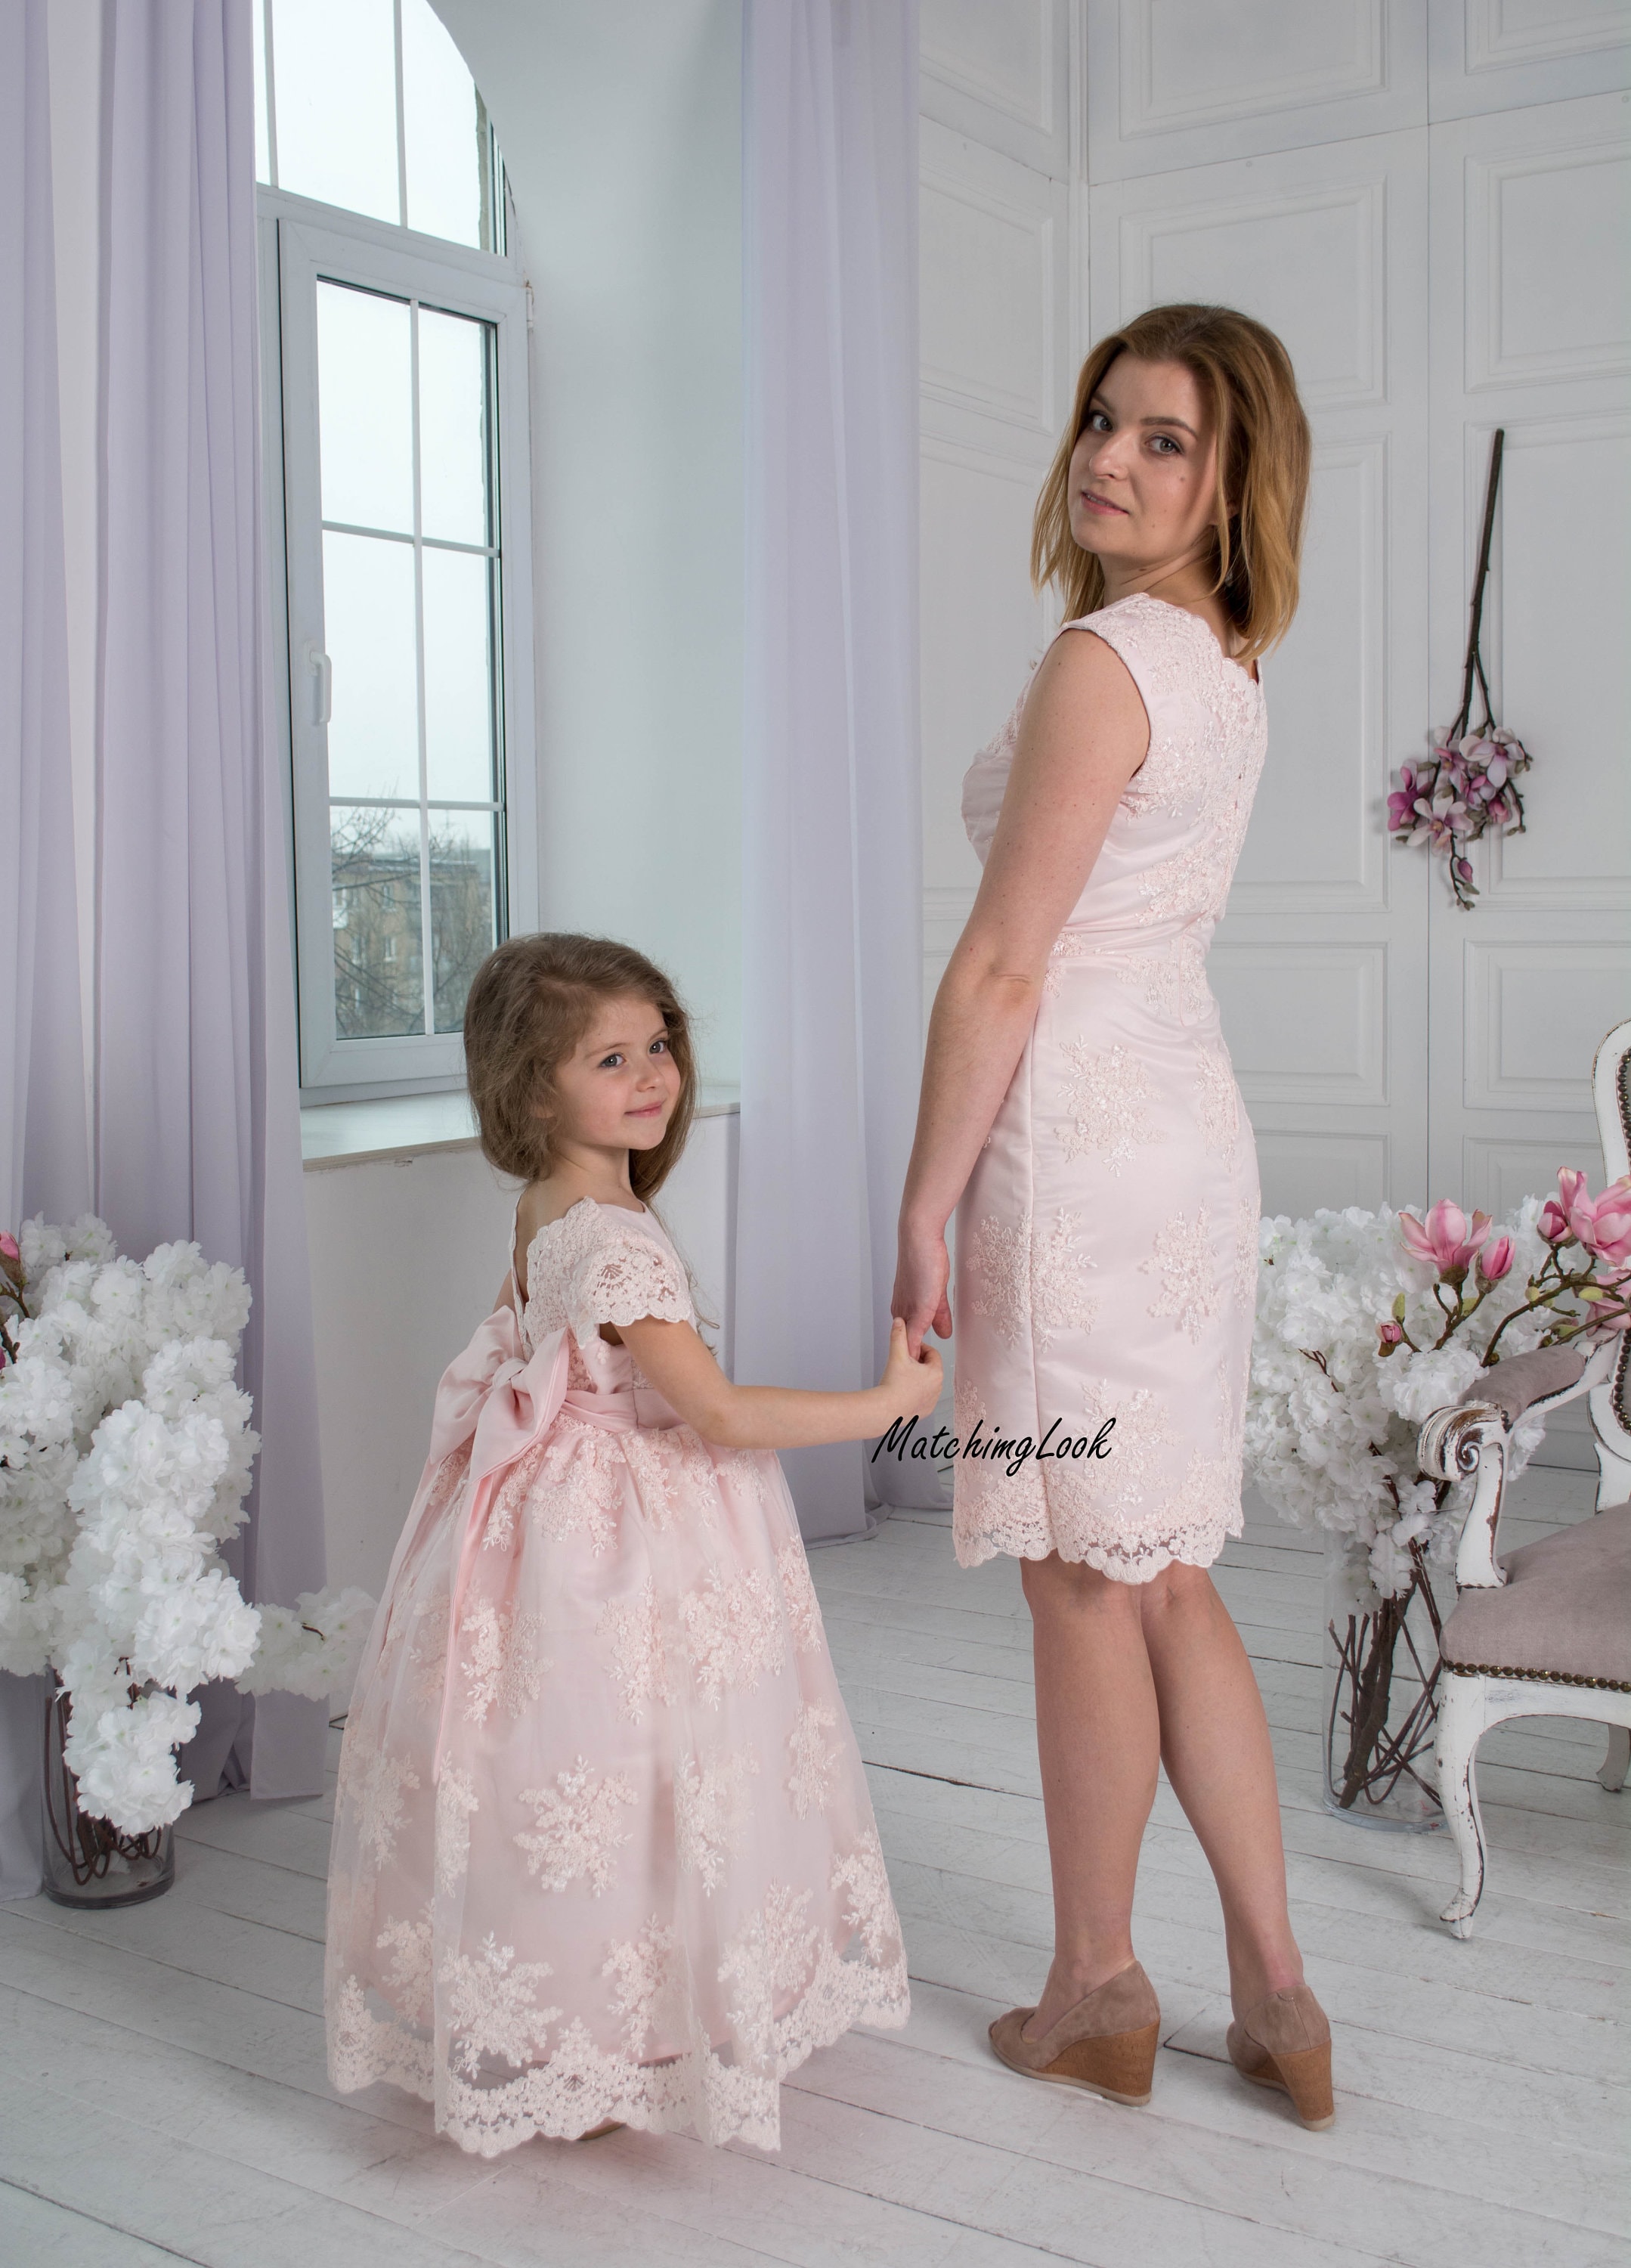 Sky Blue Mother Daughter Matching Dress for Photoshoot Birthday Party Dress  Mommy and Me Family Look Maternity Baby Shower Gowns - AliExpress